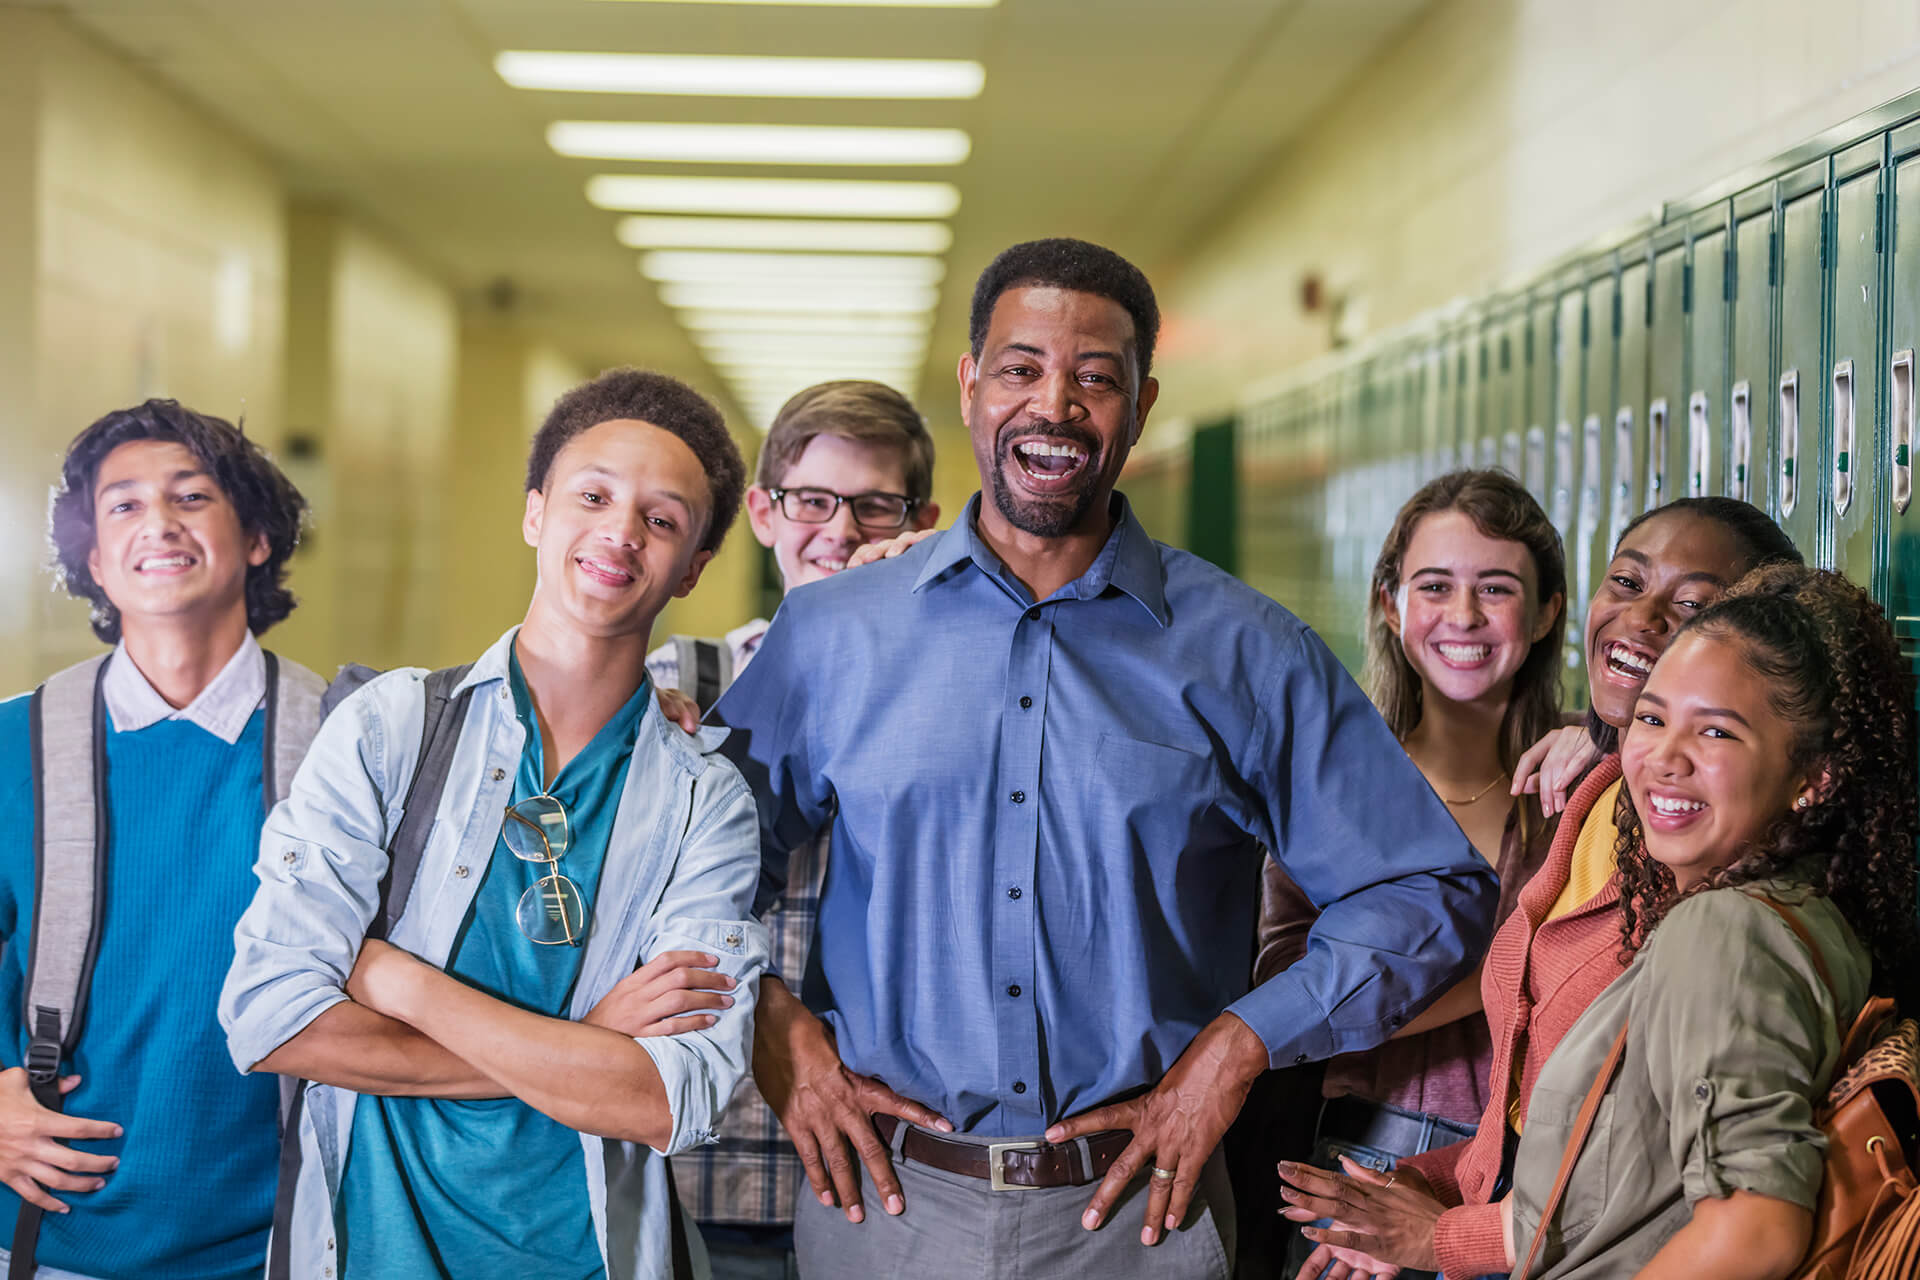 Teacher and students standing in hallway smiling